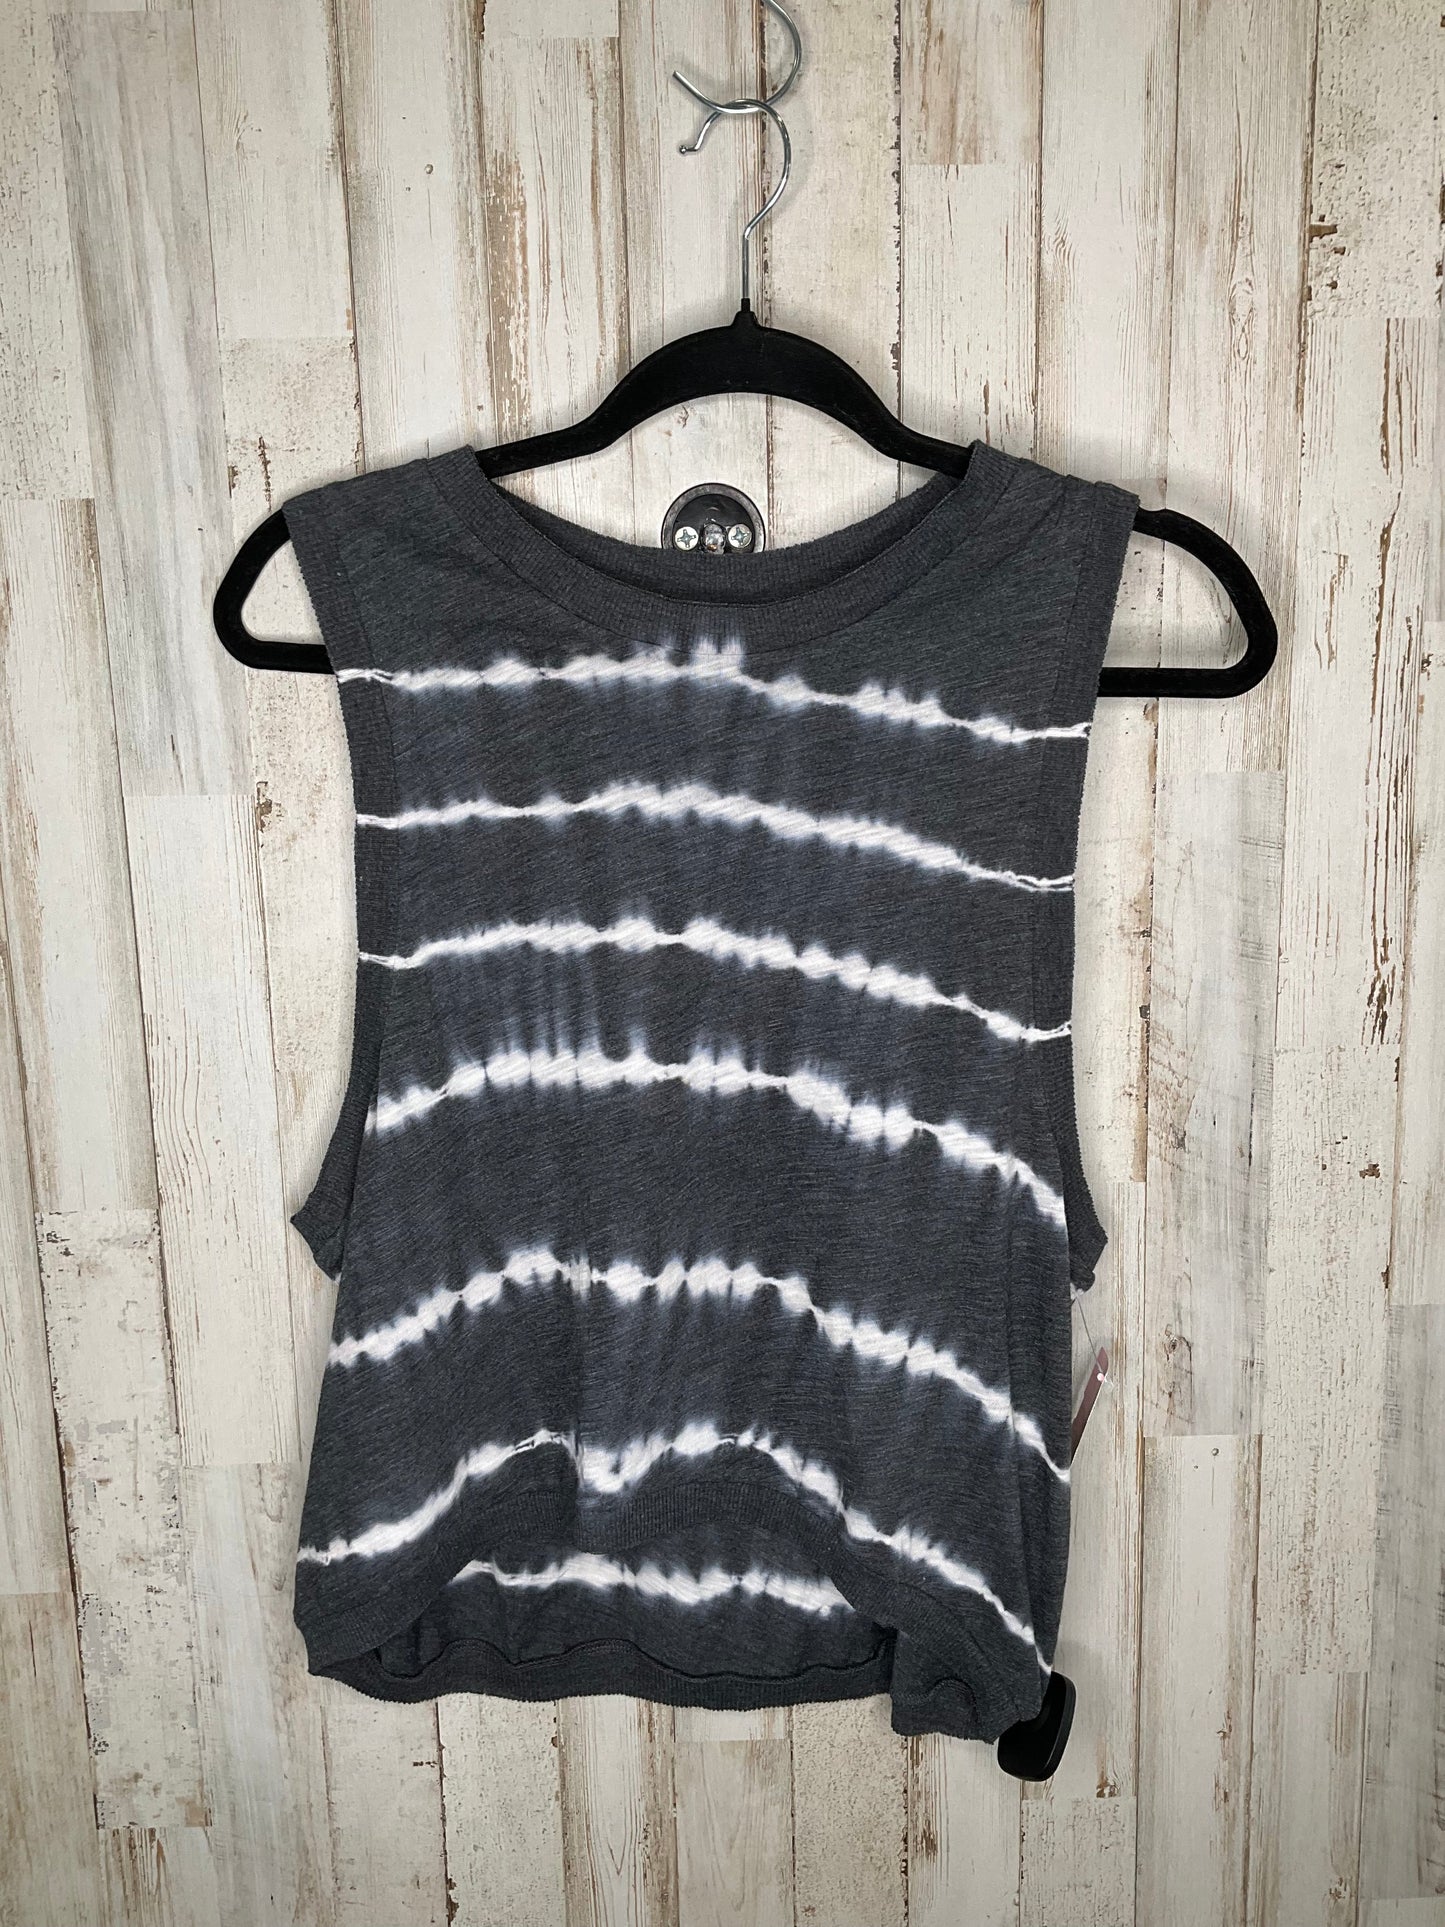 Grey Athletic Tank Top Free People, Size Xs